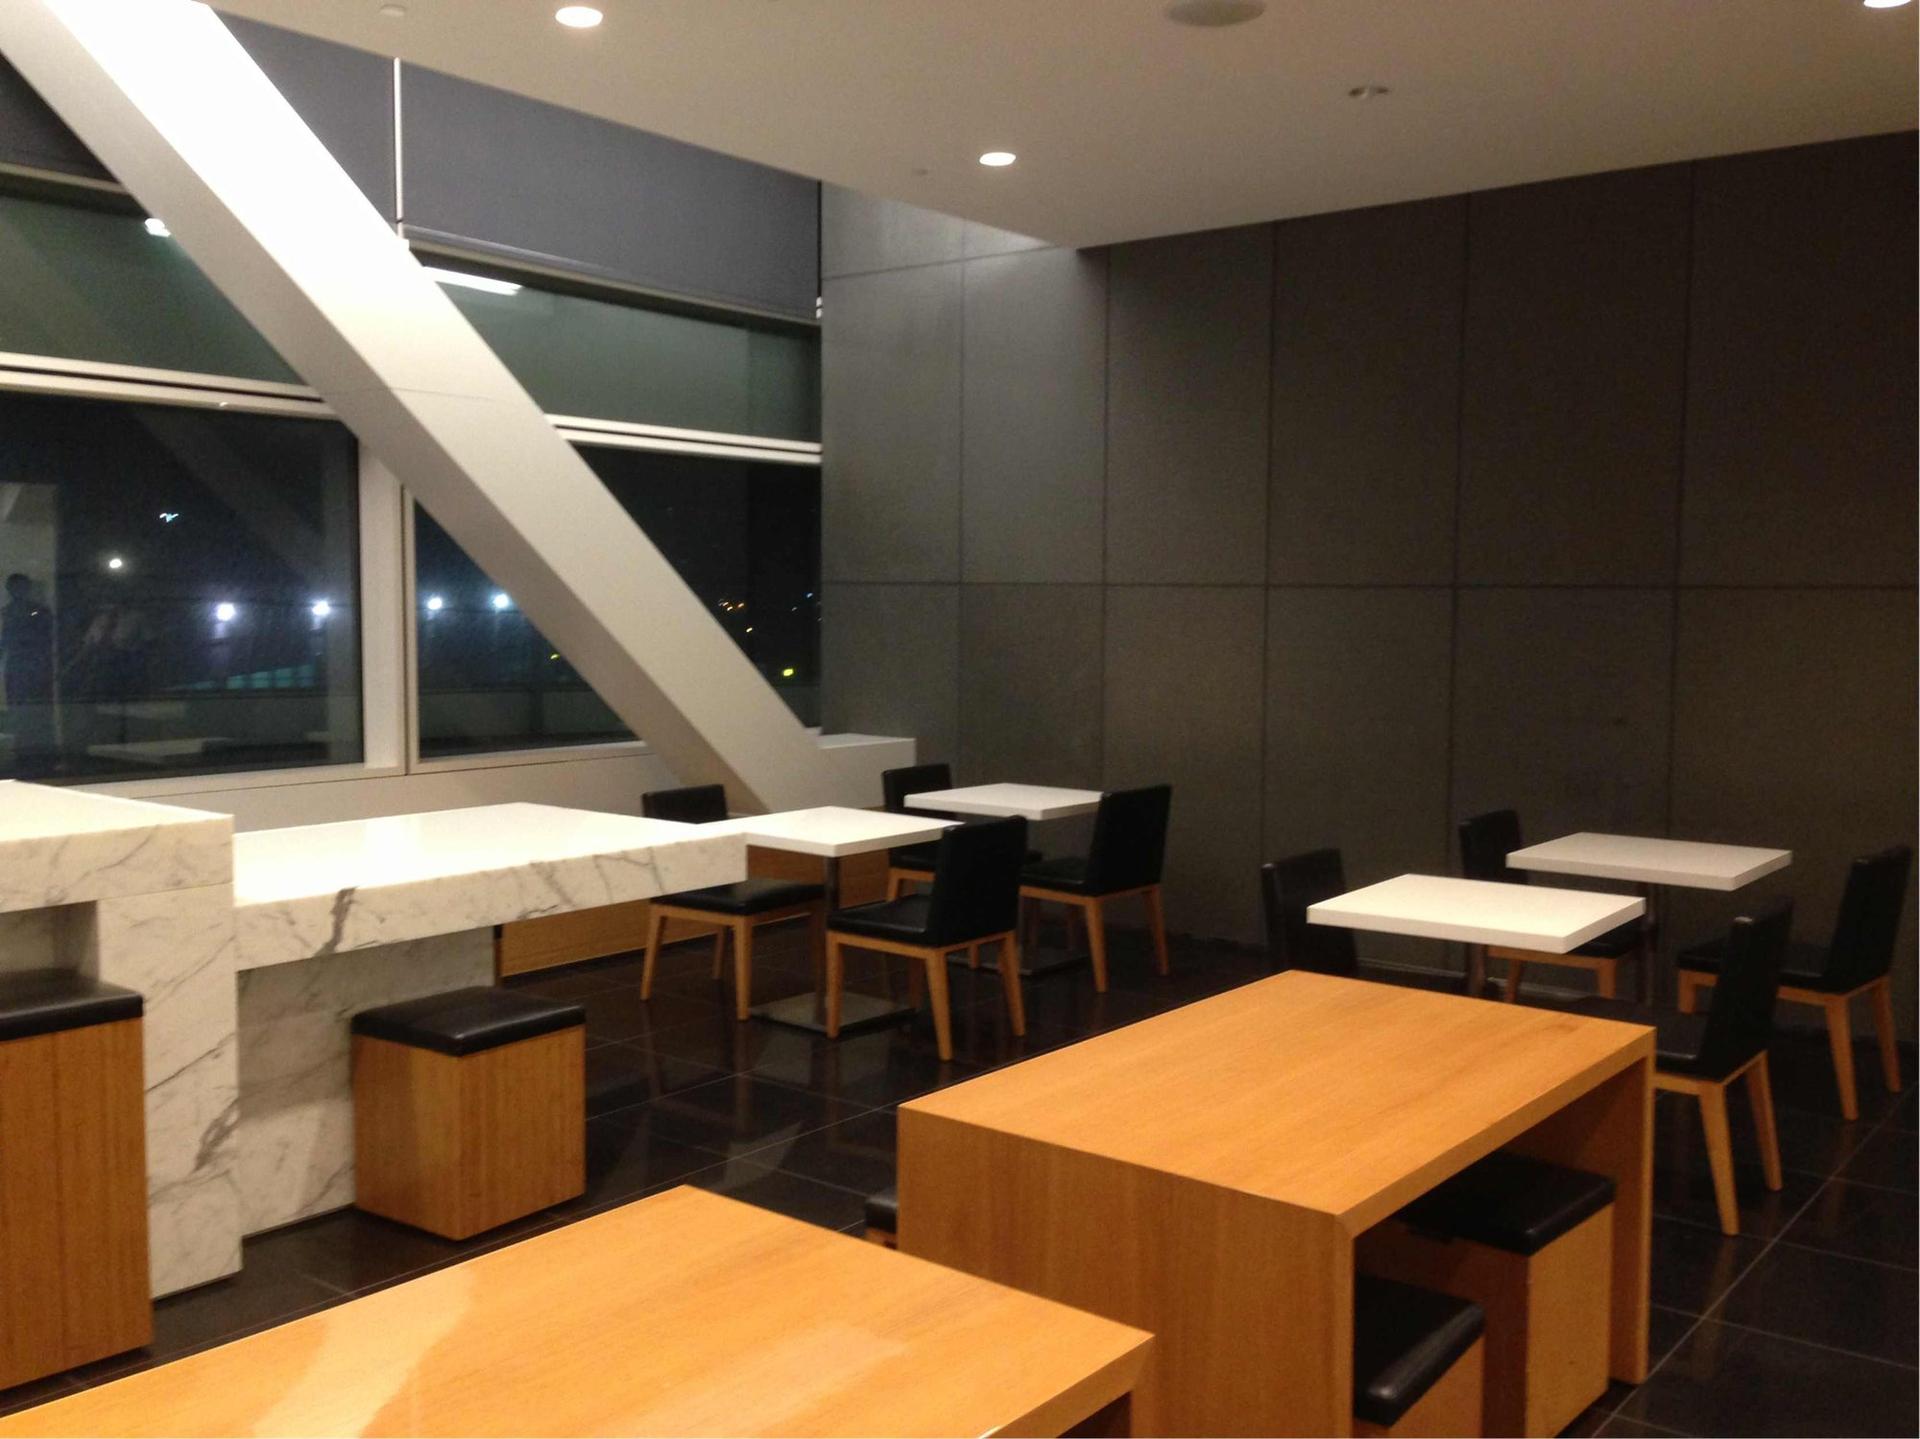 Cathay Pacific First and Business Class Lounge image 14 of 74